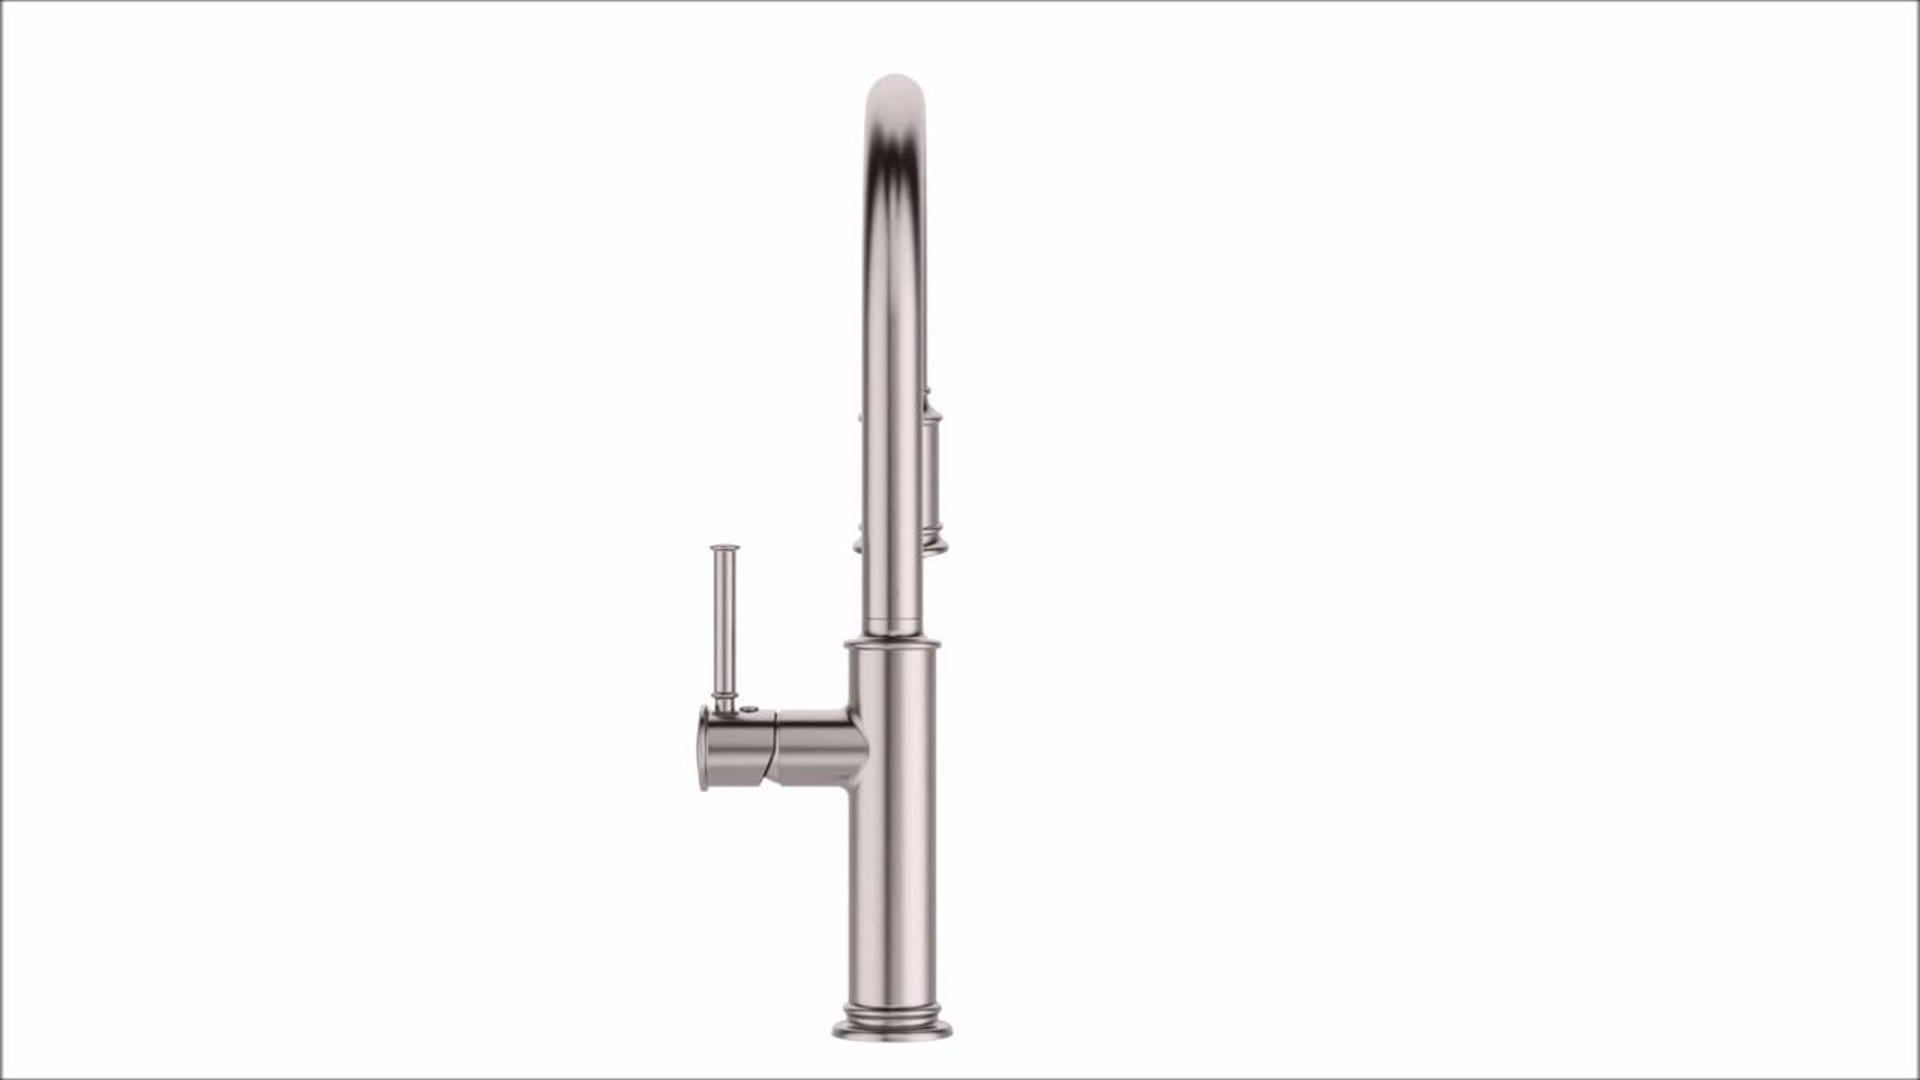 Sellette Pull-Down Kitchen Faucet, Spot Free Stainless Steel